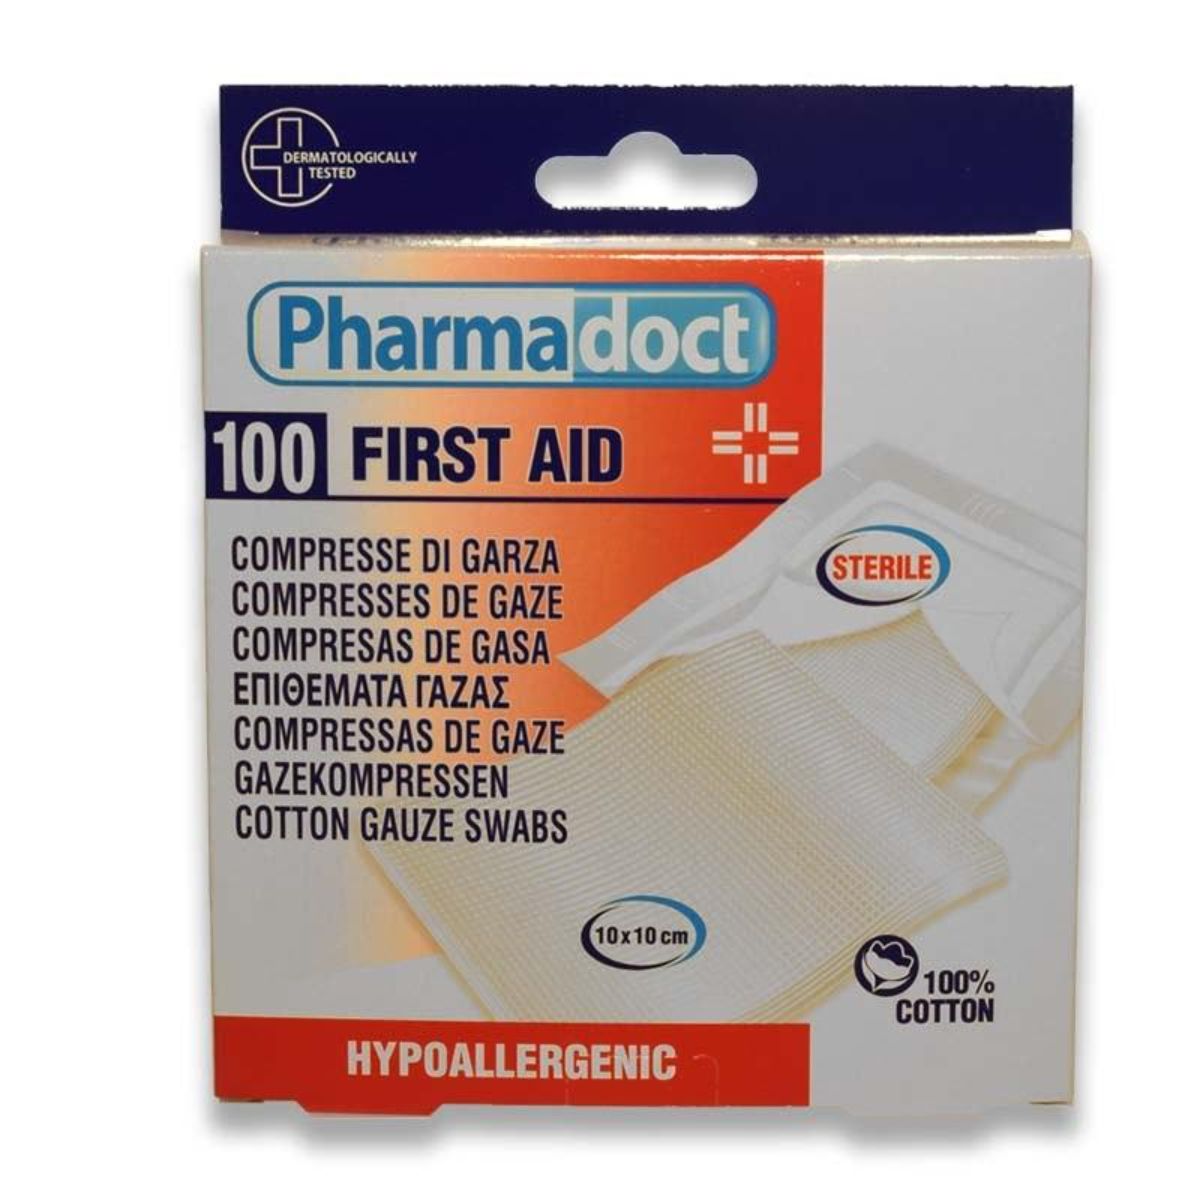 Comprese sterile din bumbac, Pharmadoct First Aid, 100 Buc 10 x 10 cm 100